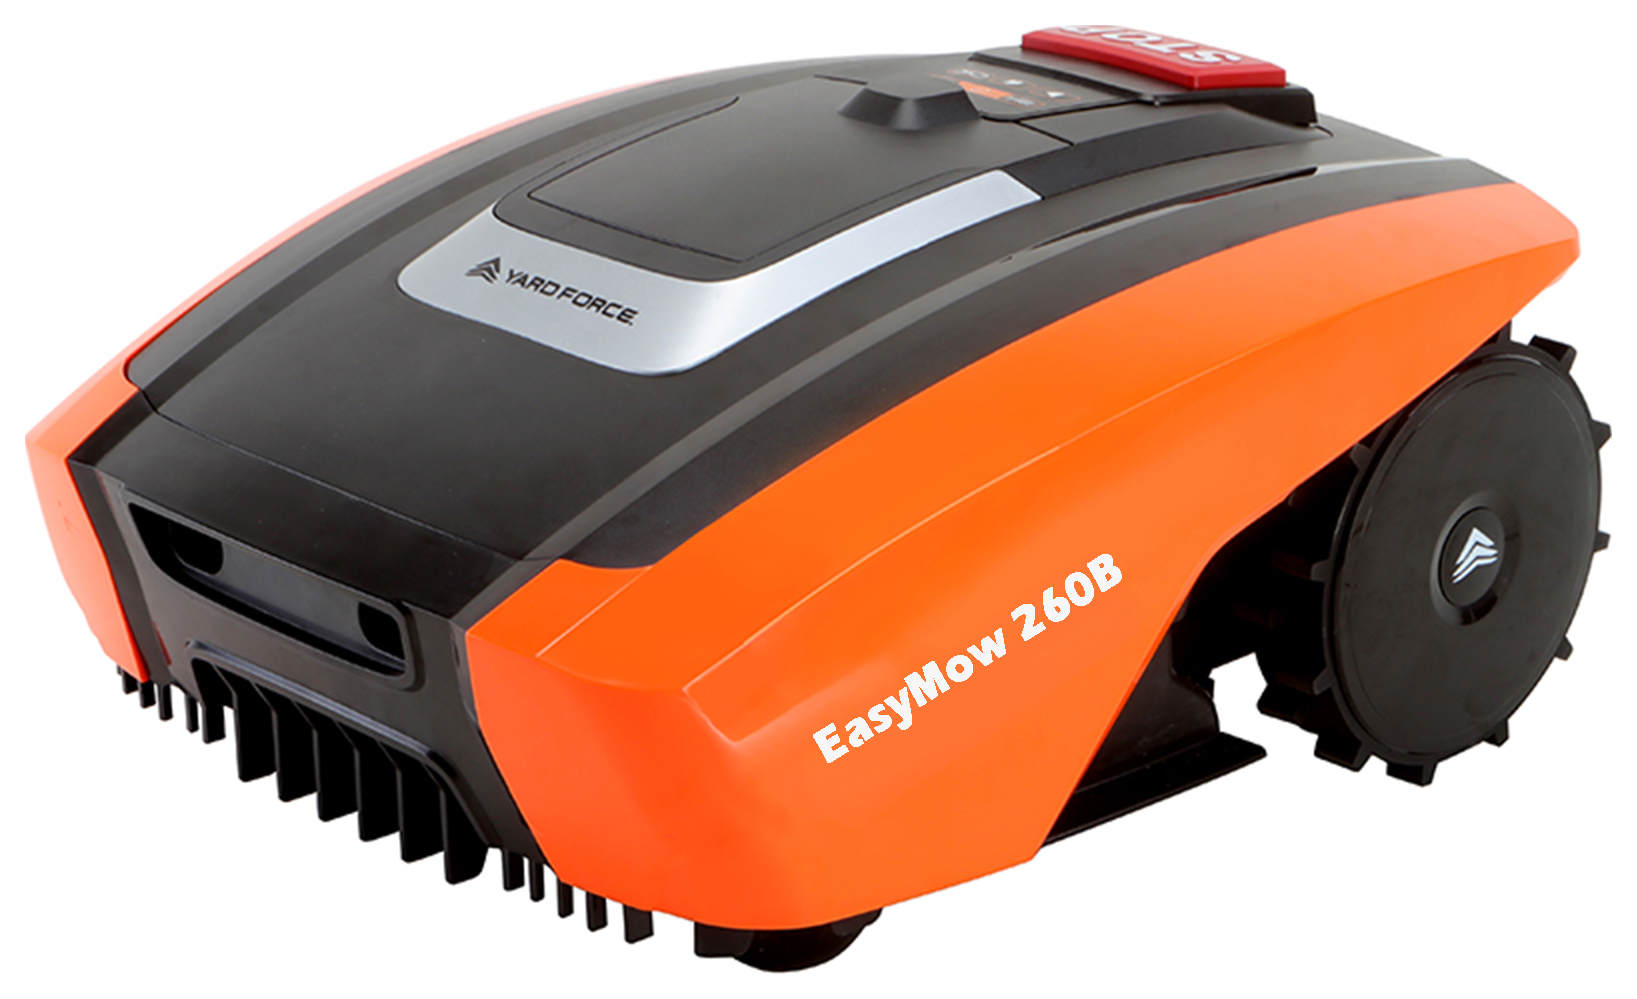 Image of Yard Force EasyMow 260B Robotic Lawnmower with Additional Protection & Built-In Sensors